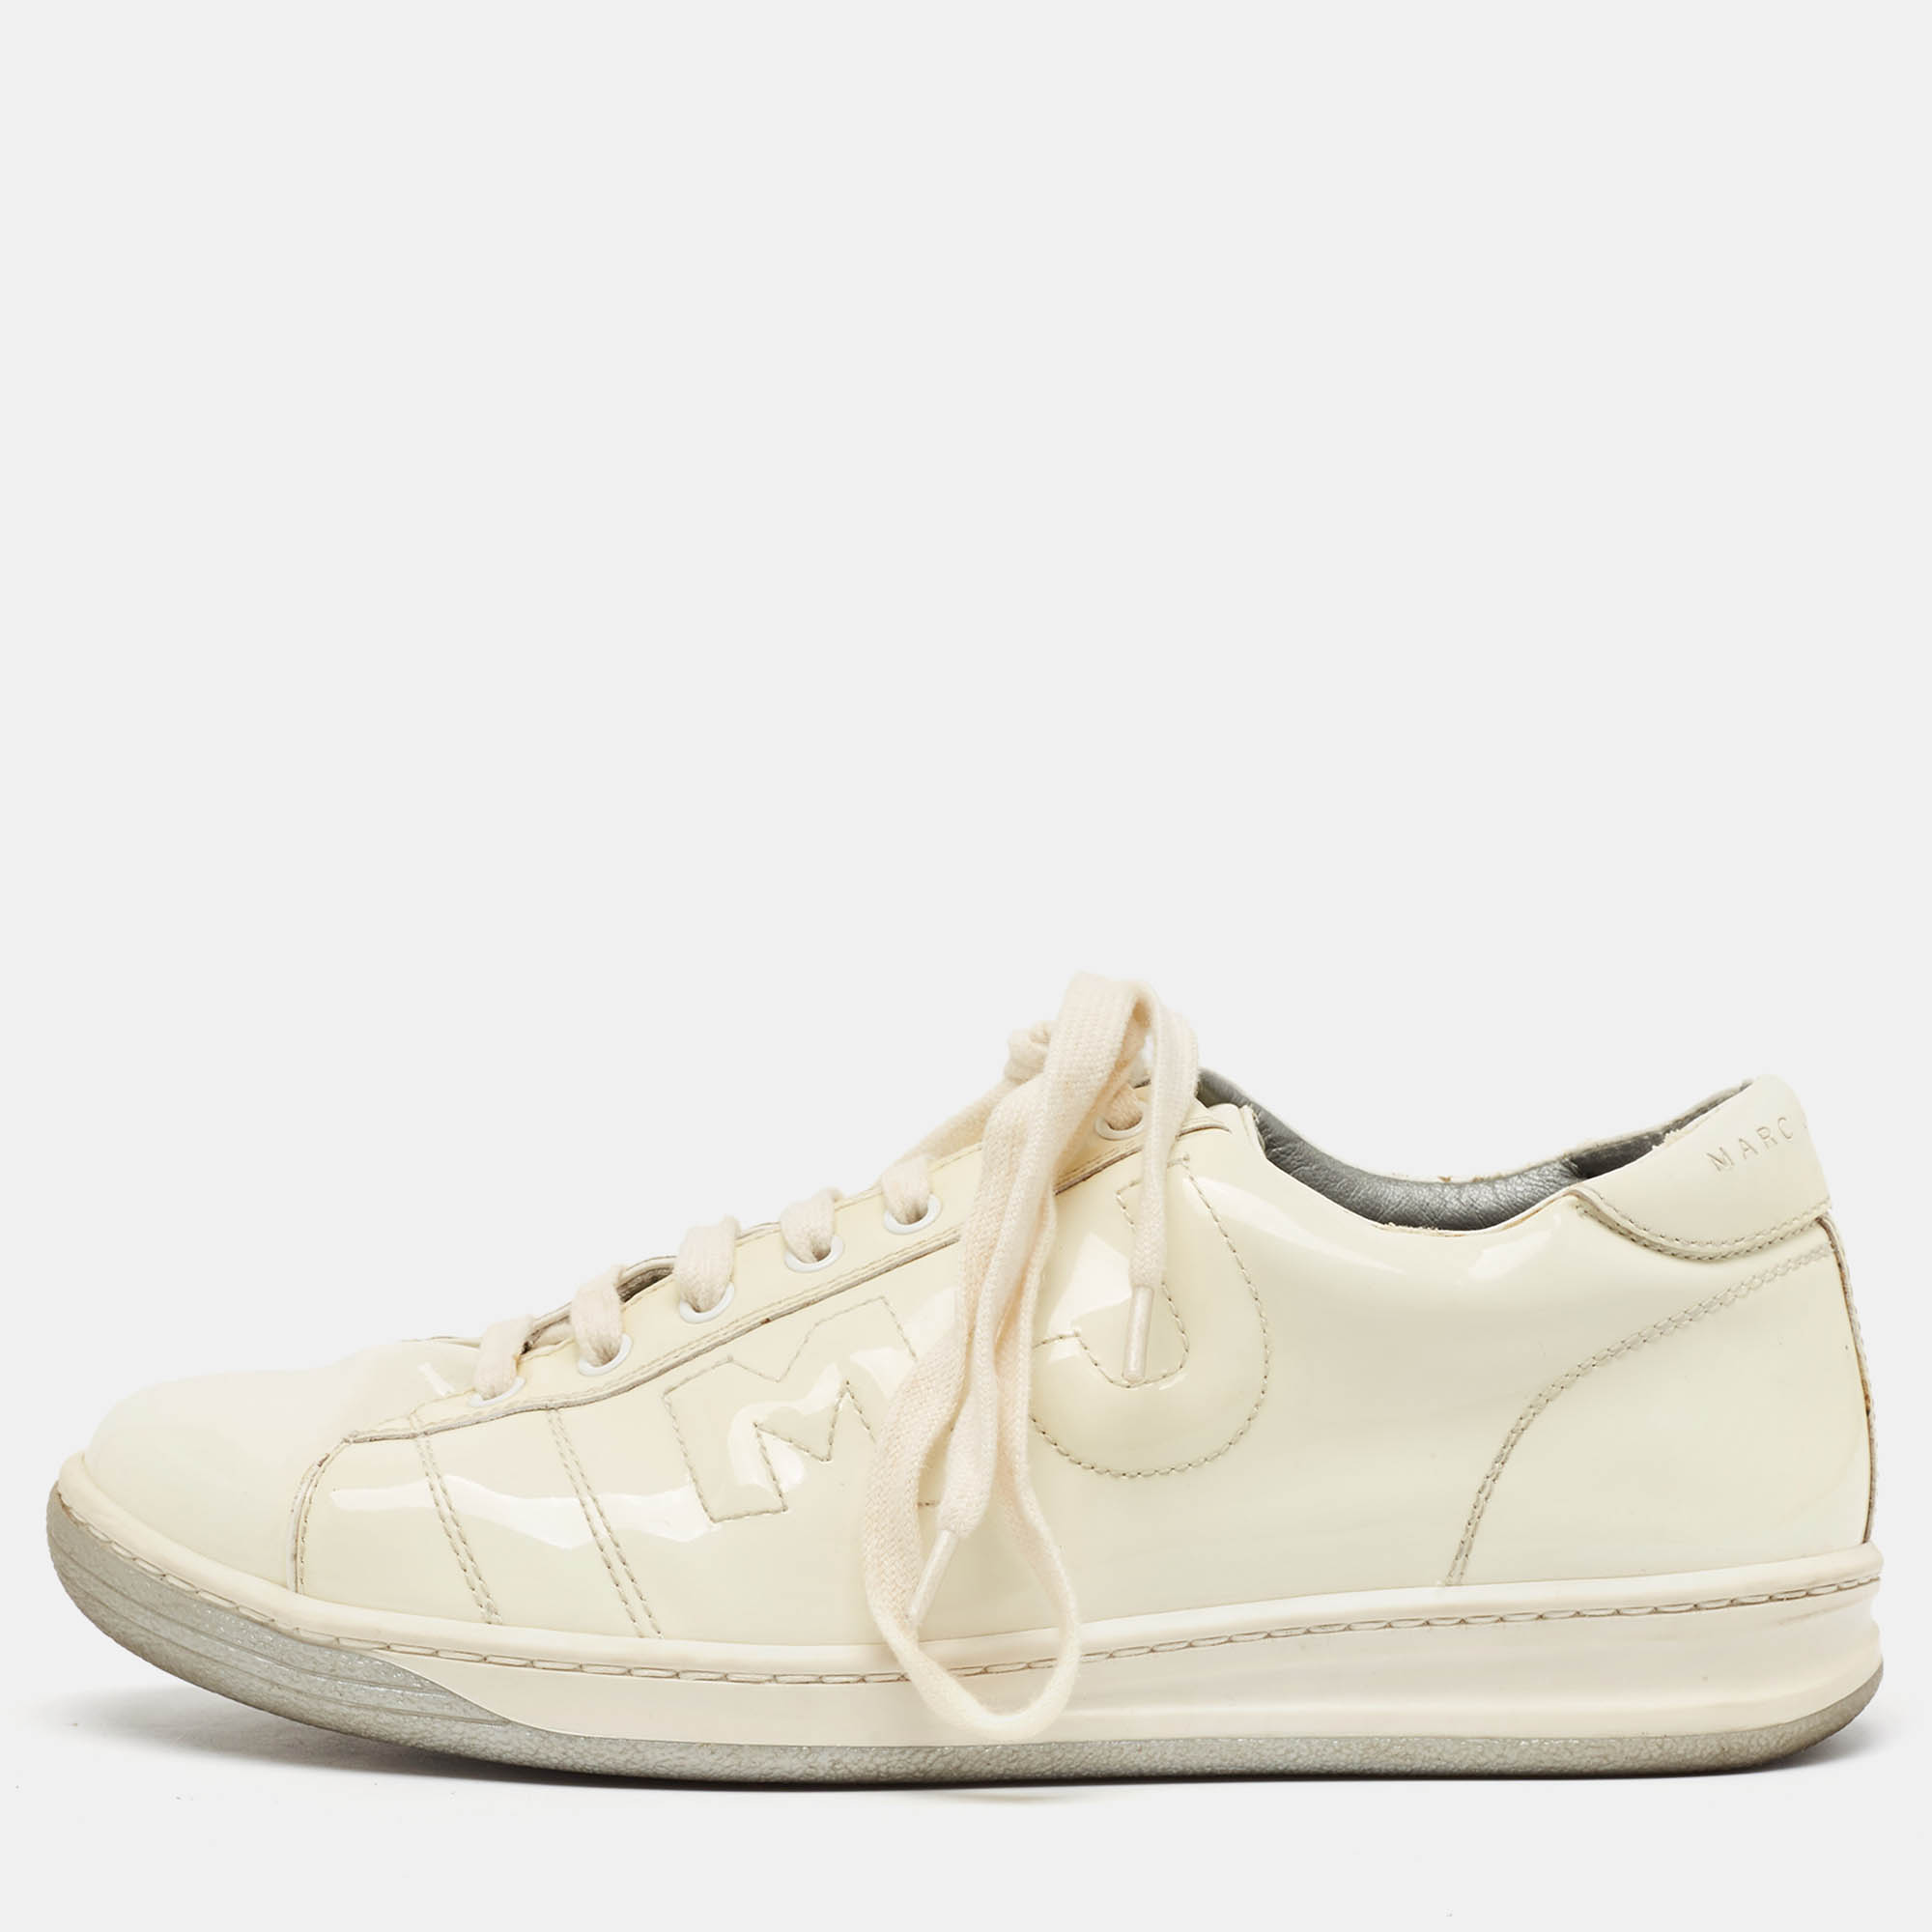 Marc jacobs white patent leather low top sneakers size 42